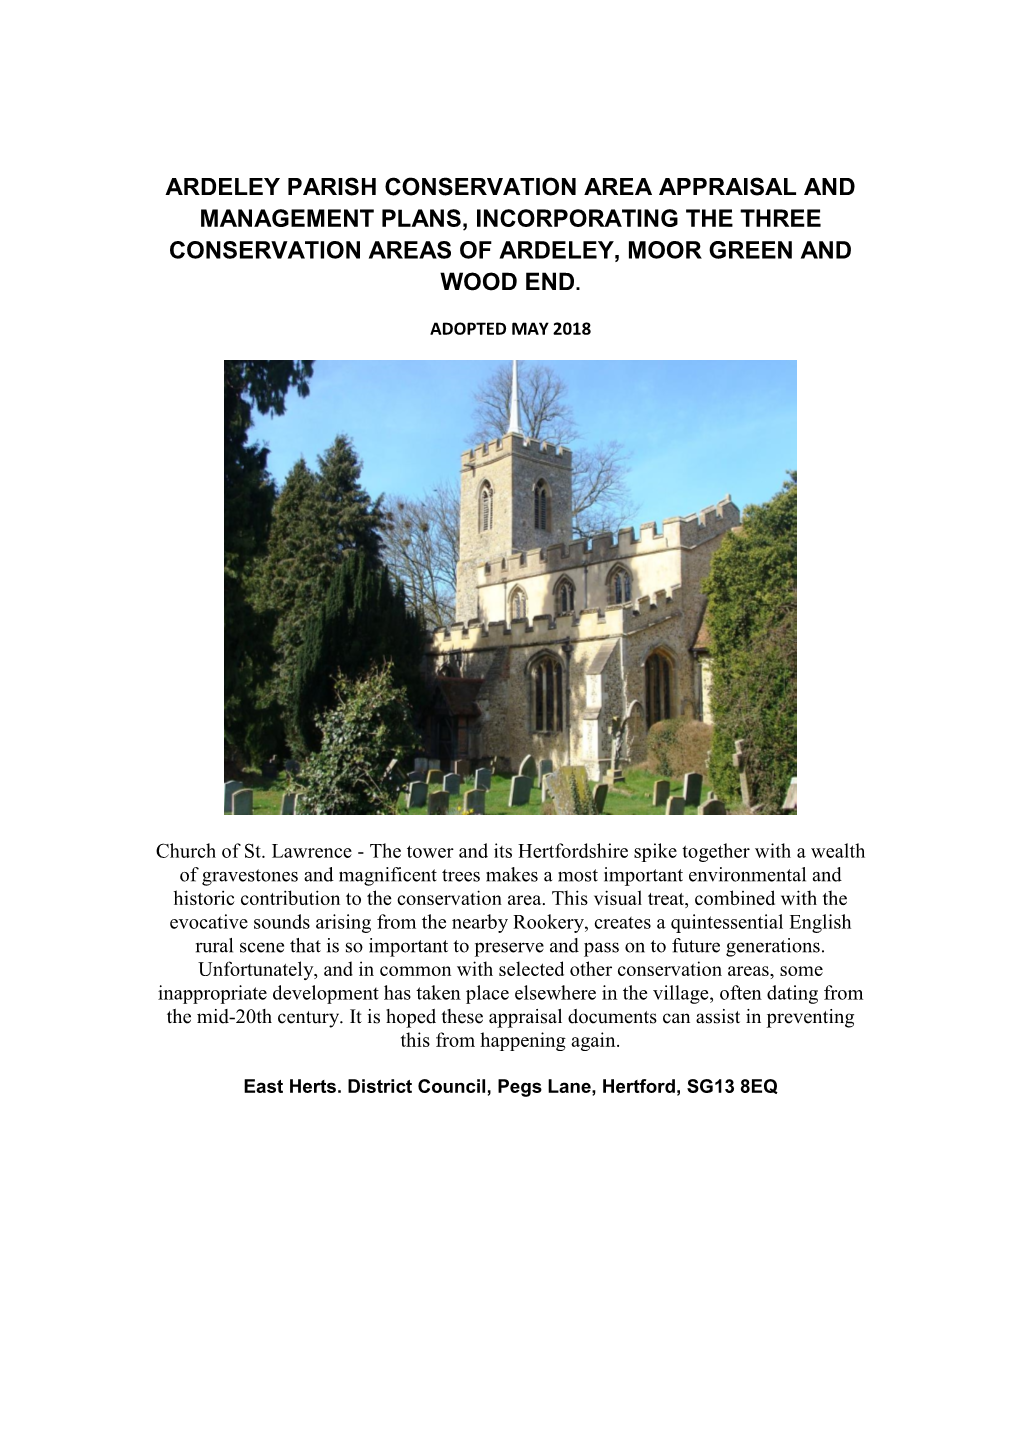 Ardeley Parish Conservation Area Appraisal and Management Plans, Incorporating the Three Conservation Areas of Ardeley, Moor Green and Wood End